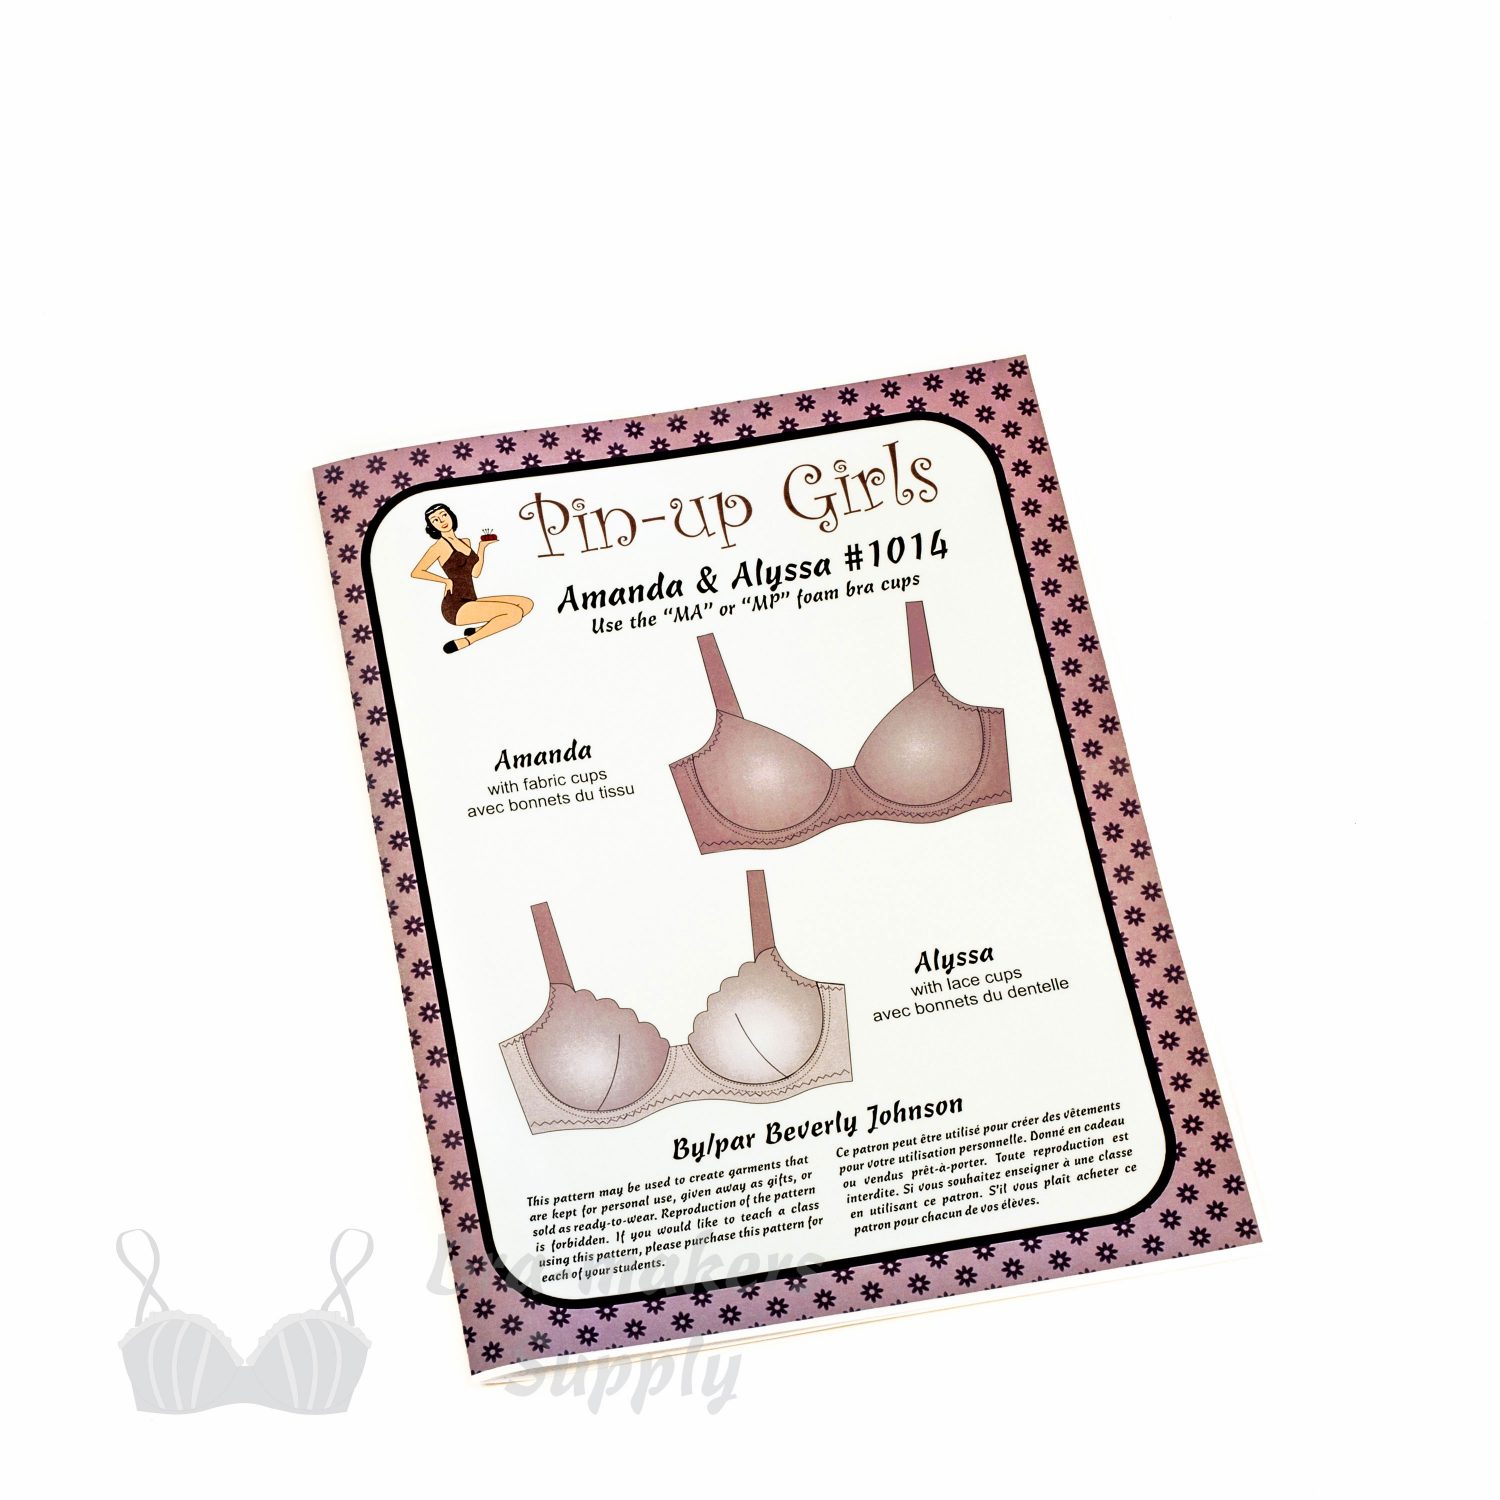 T Shirt Foam Cup Bra Pattern Bra Makers Supply The Leading Global Source For Bra Making And 